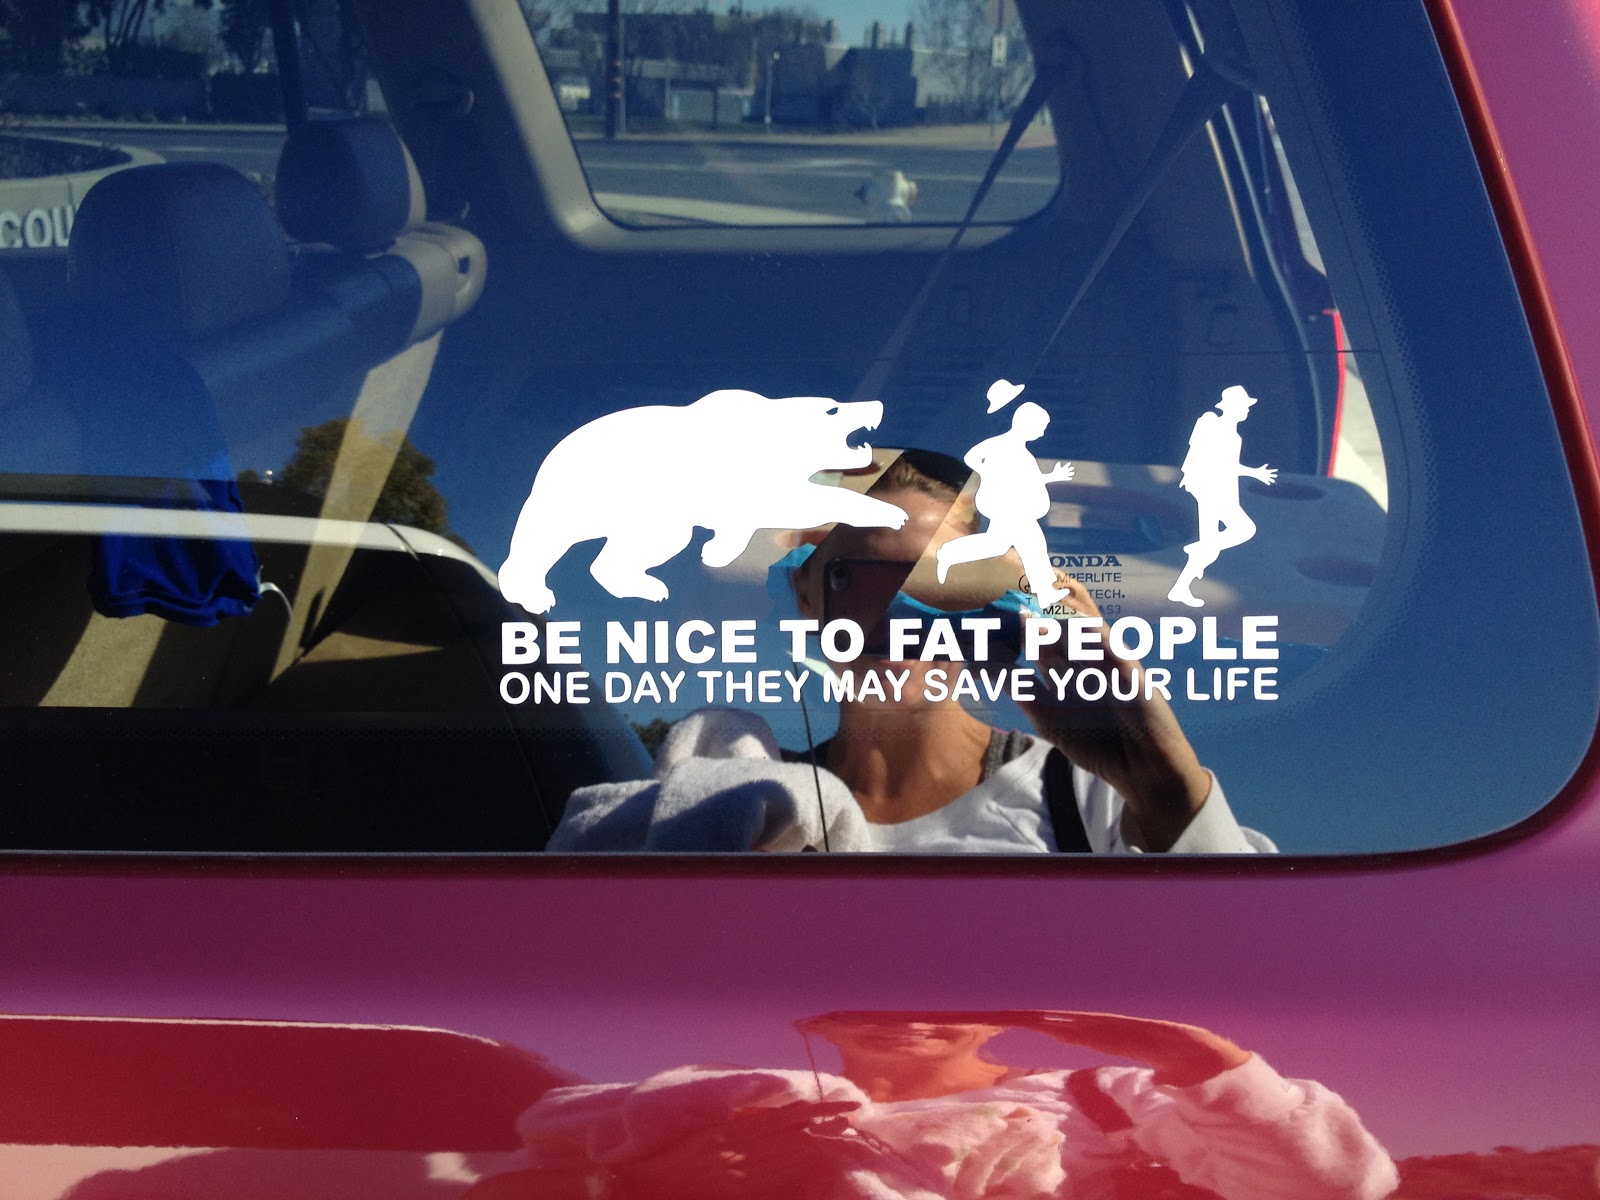 best bumper stickers ever - Cou Onda Mperlite Tech. M2L3 Be Nice To Fat People One Day They May Save Your Life